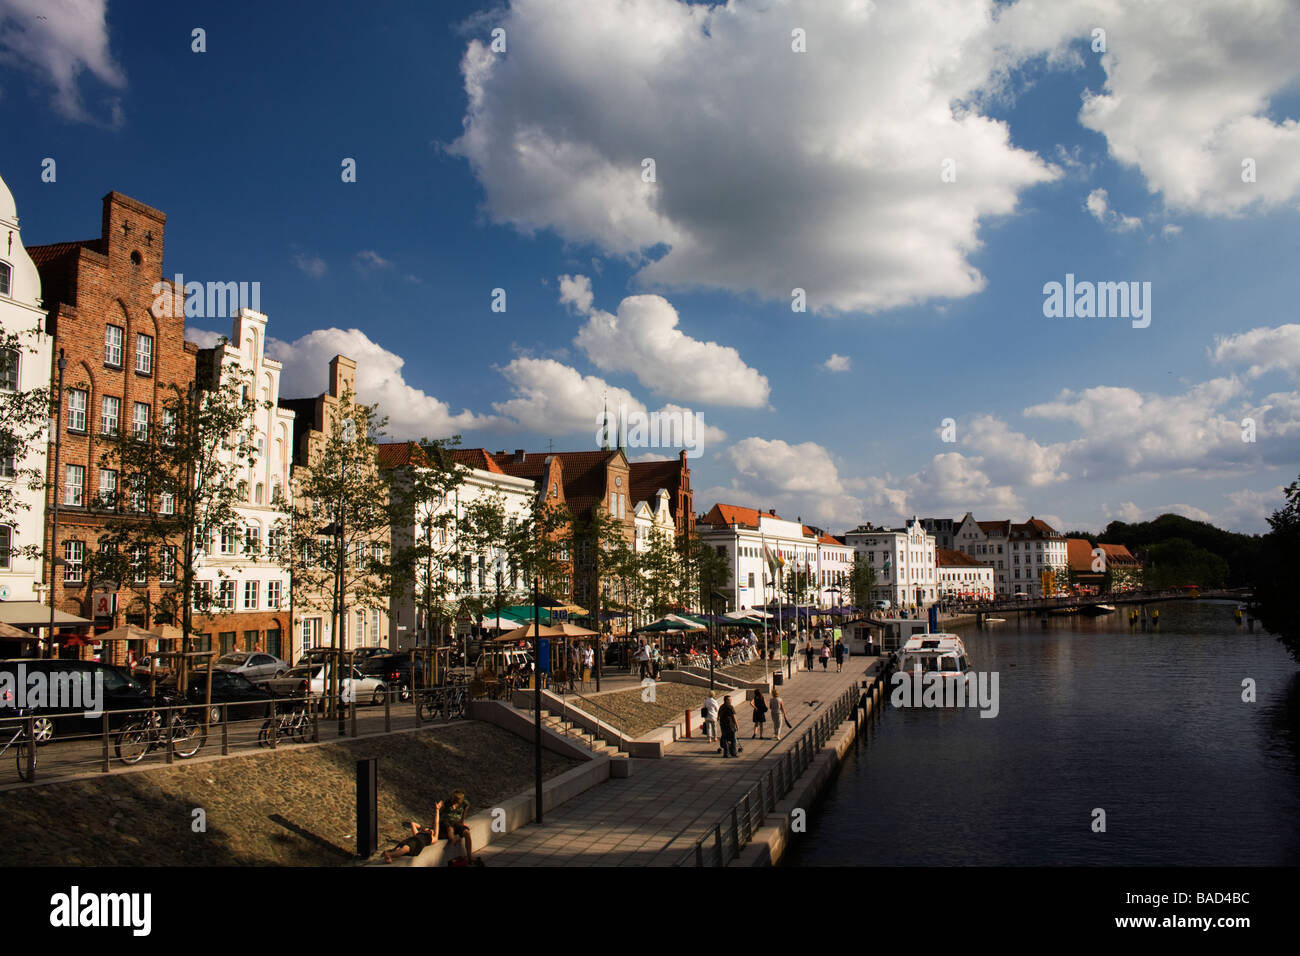 Luebeck, Schleswig- Holstein, Germany. Waterfront Crow-step gable houses and river Trave with tourists along its walkway Stock Photo